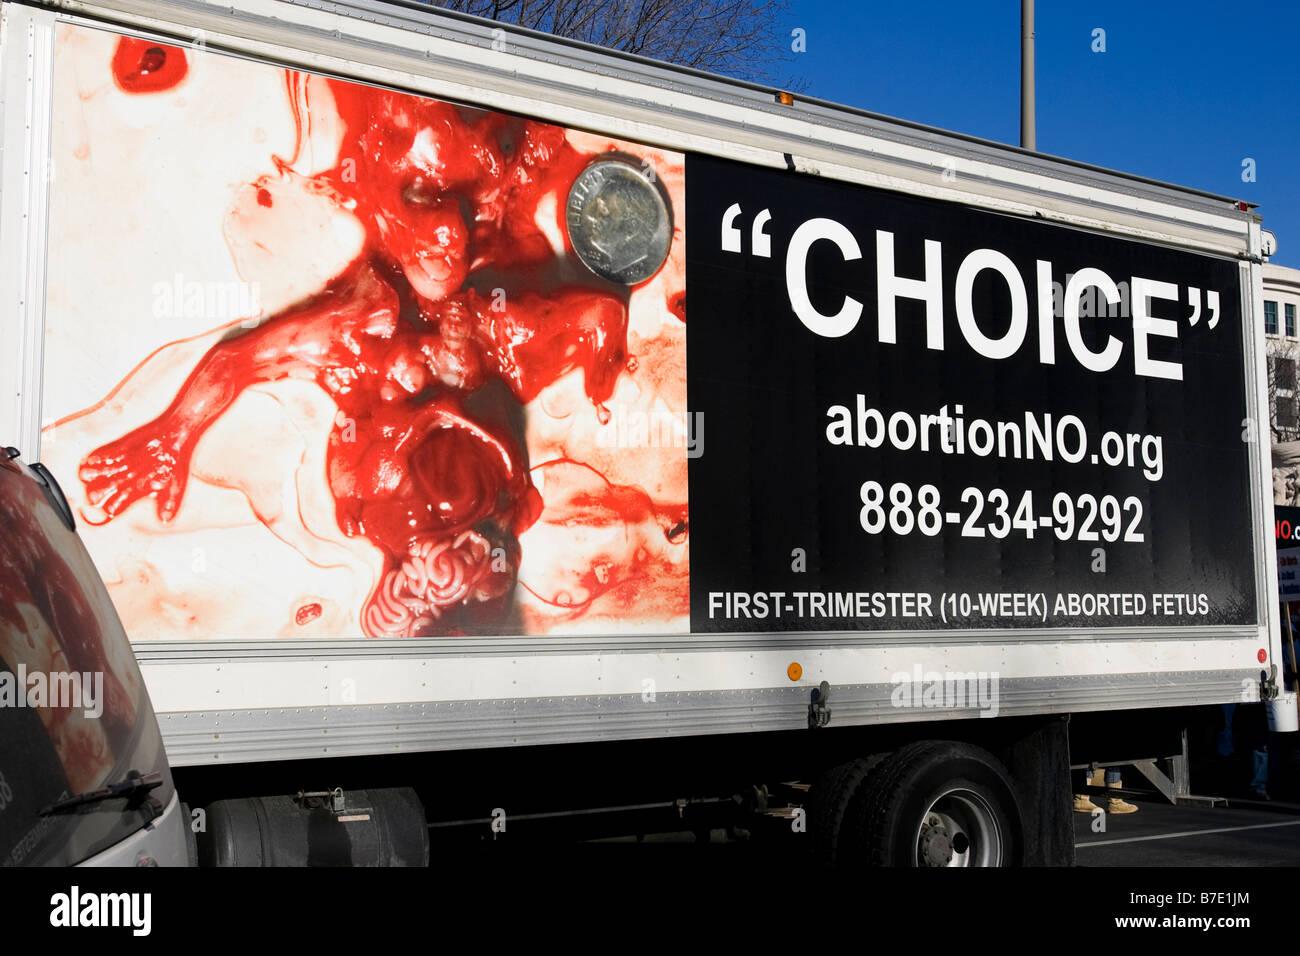 A hard message displayed on the side of a truck in the 'March for Life' rally Stock Photo